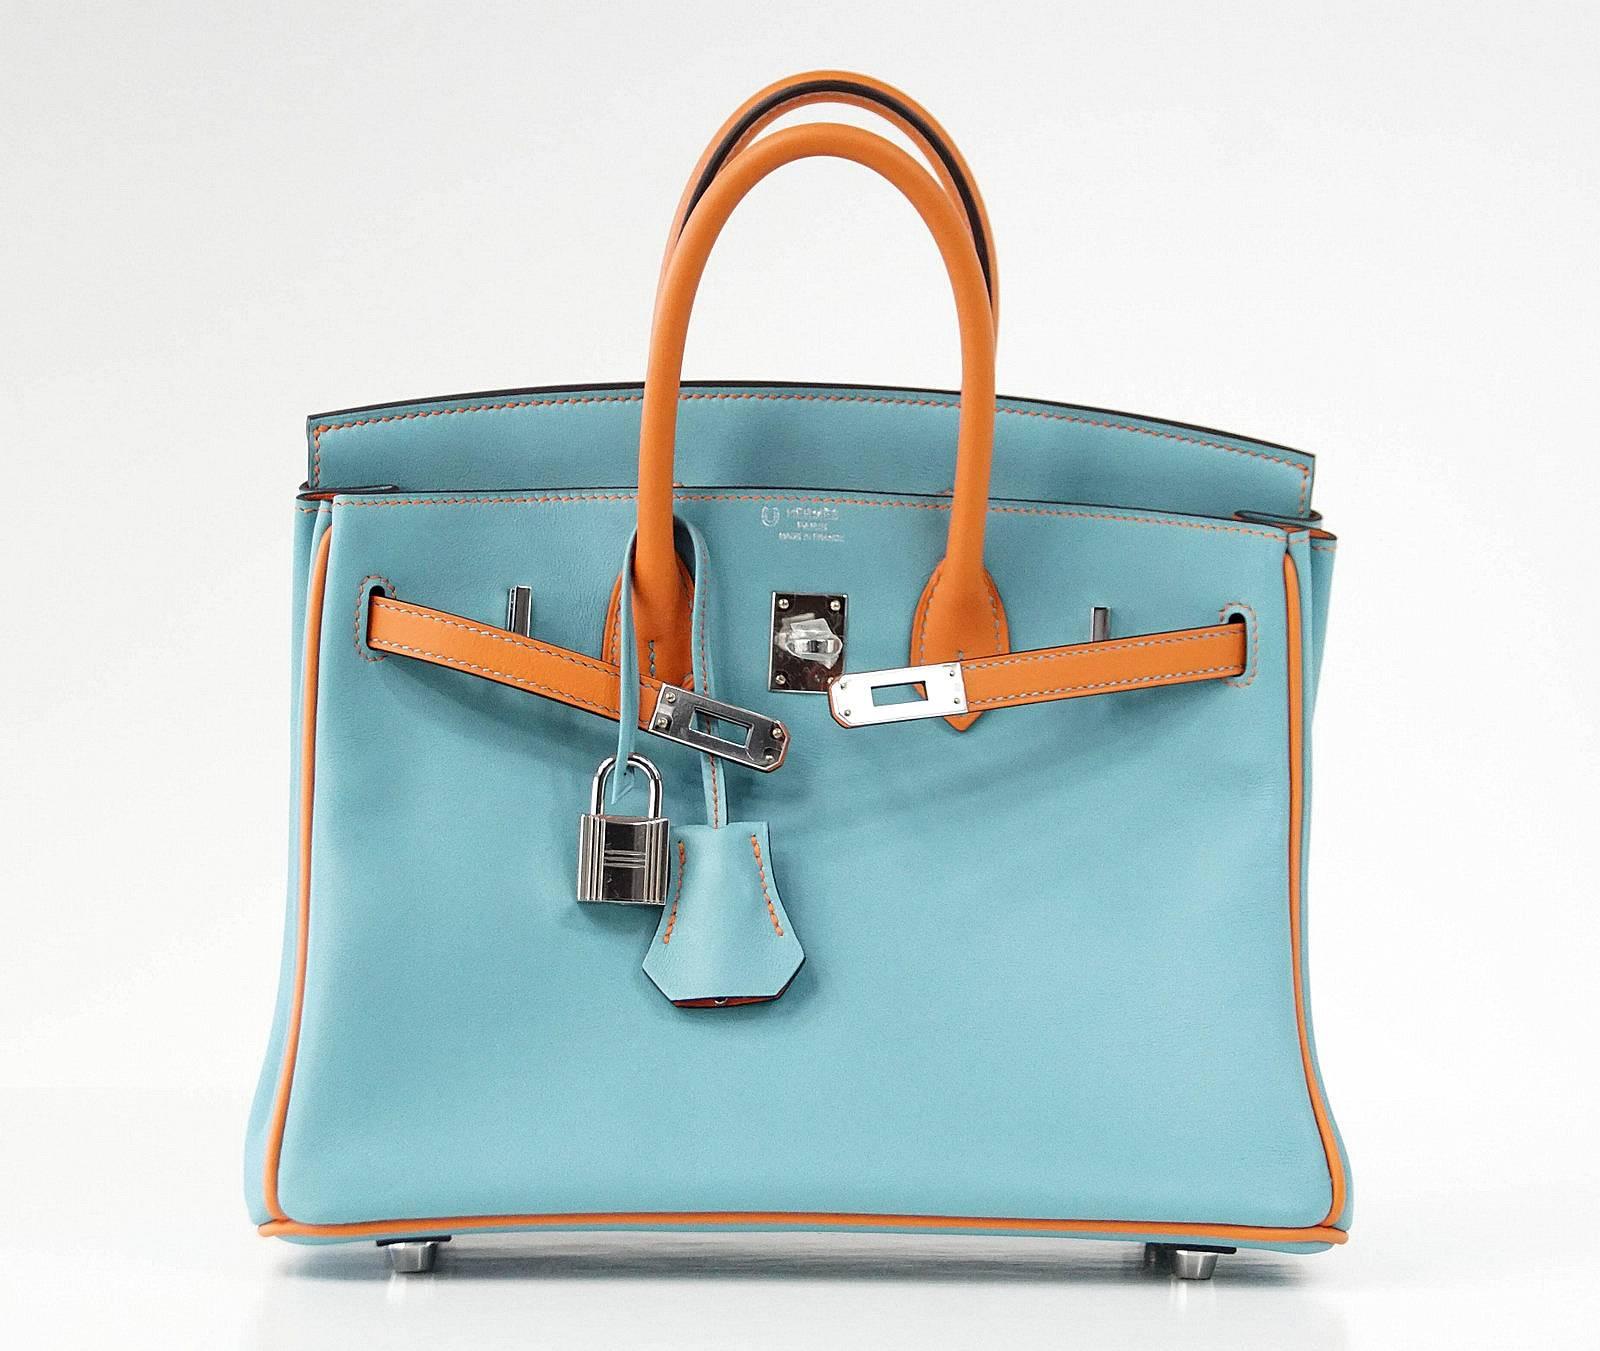 Guaranteed authentic Bleu Saint Cyr and Feu pop of color in swift leather.
Fresh with Palladium hardware. 
Comes with lock, keys, clochette, sleepers, raincoat and signature Hermes box.
NEW or NEVER WORN.
final sale

BAG MEASURES:
LENGTH  25cm /